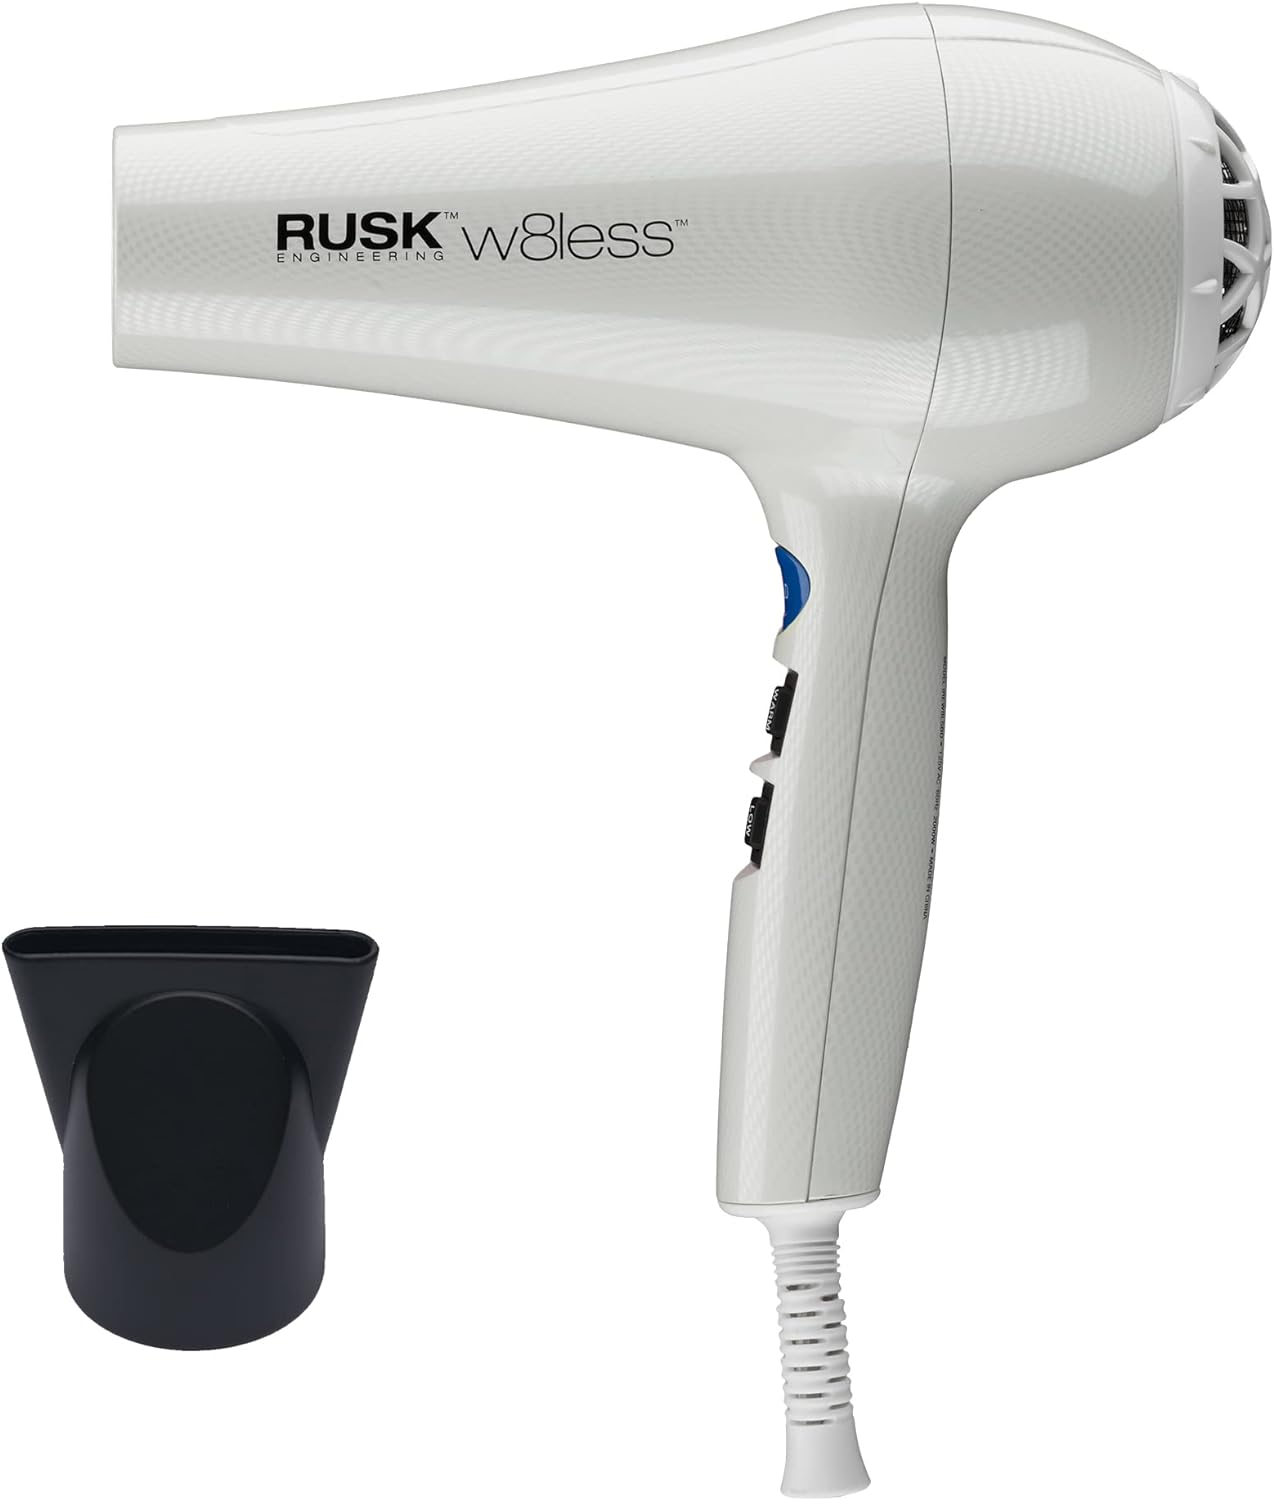 The product is so worth the money. Its an excellent blow dryer - light weight, easy to use, not as noisy as my past very expensive blow dryer. The only negative is changing the angle of the hair nozzle during use as it gets very hot. However, I have a routine now and its not a big deal. I rated it as average for travel only because it would be great for domestic or travel within North America but its not appropriate for overseas travel. I couldnt buy it in Canada so it was worth going to Ama